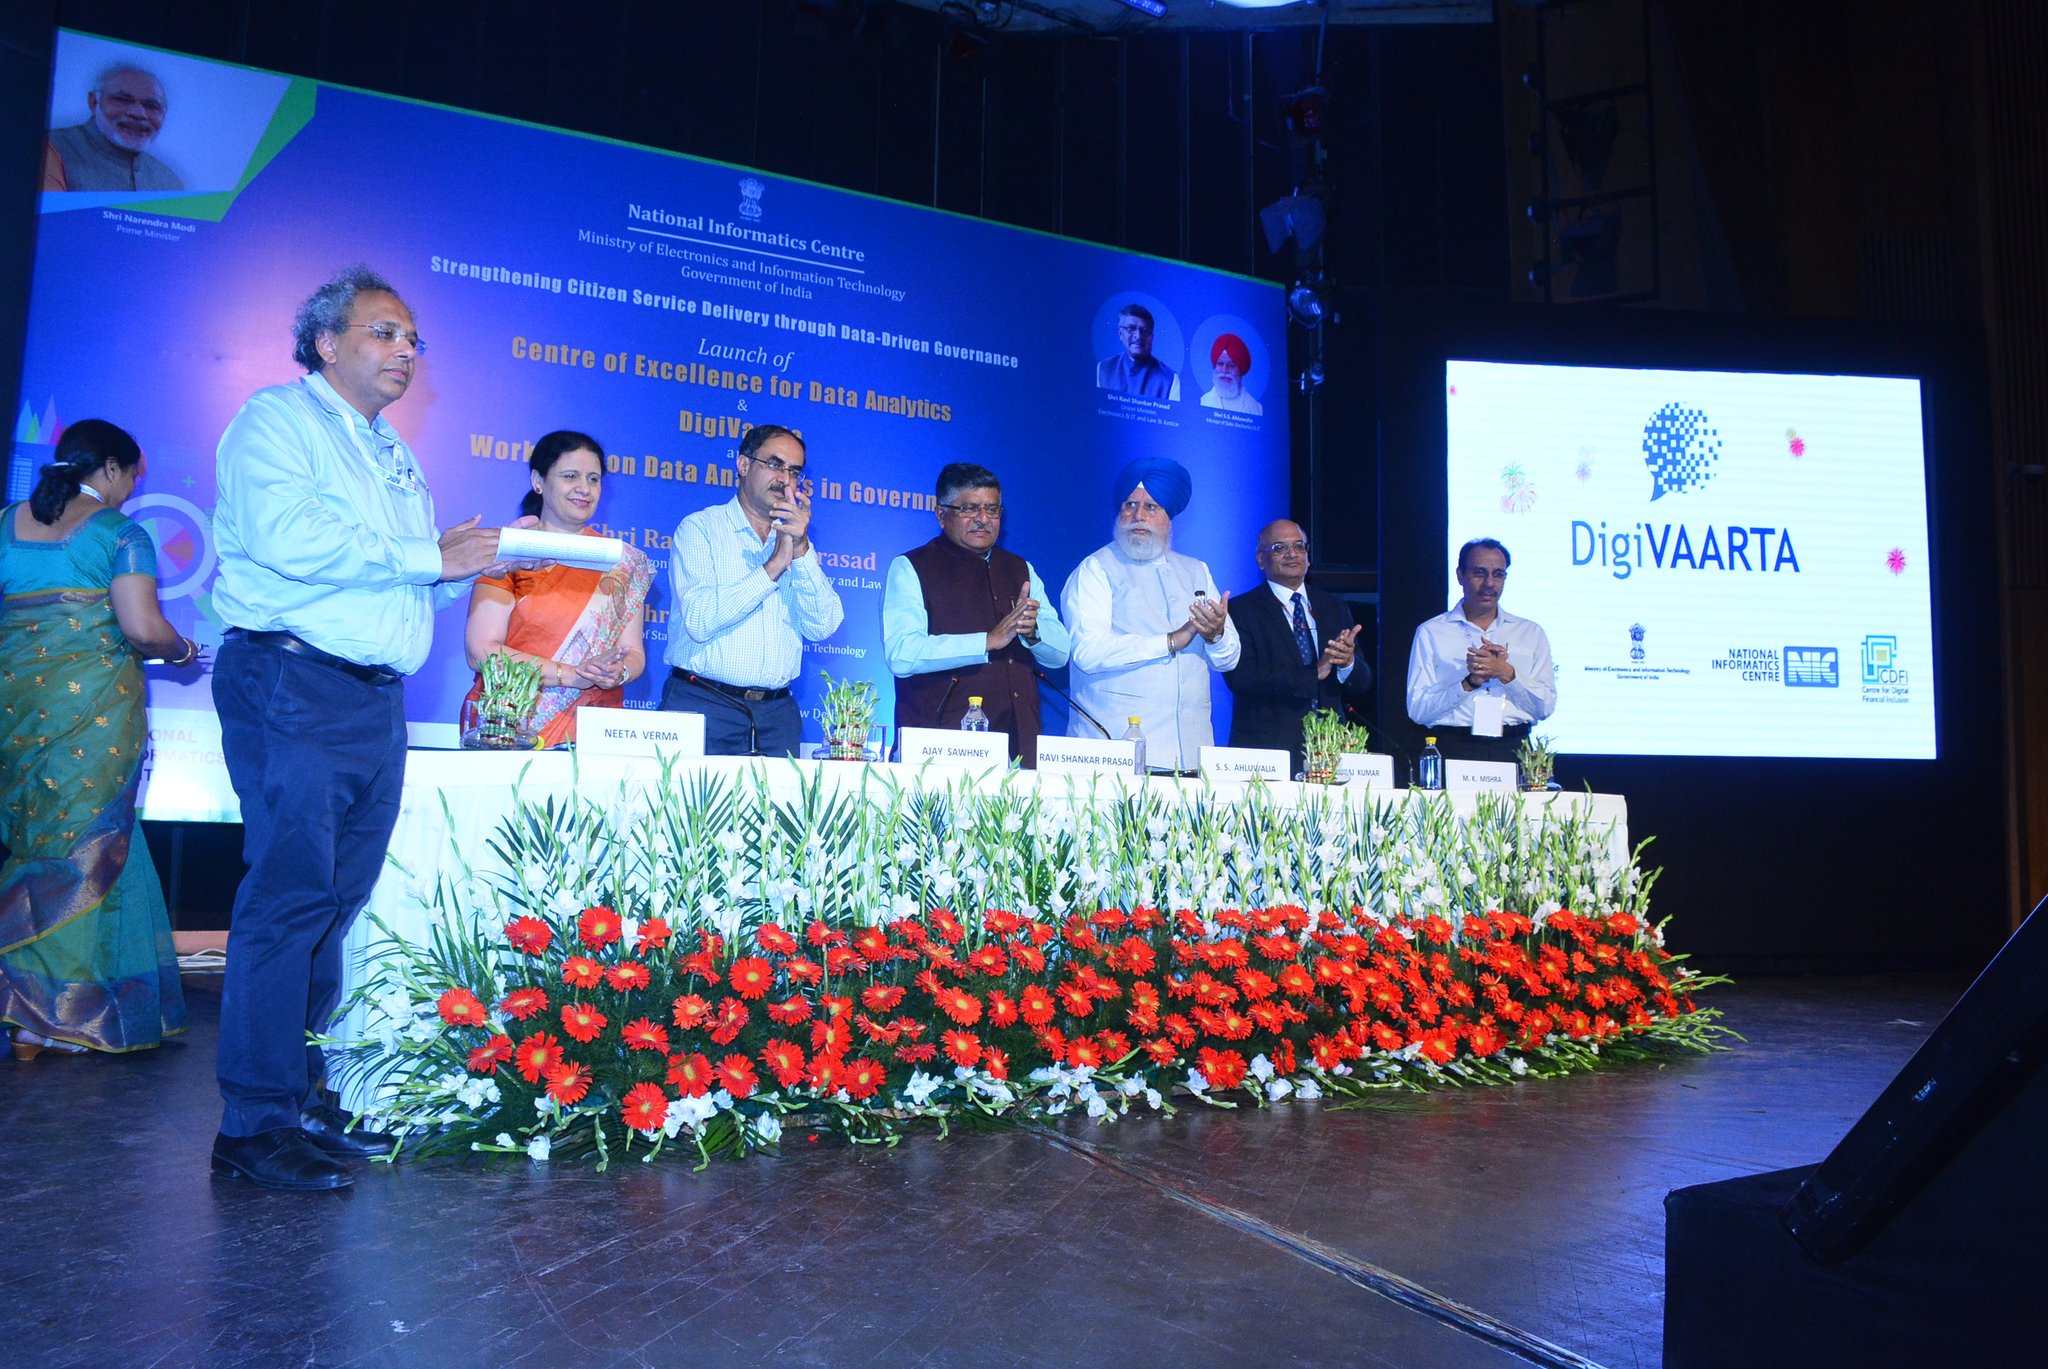 DigiVAARTA: Enabling dialogue with the common man